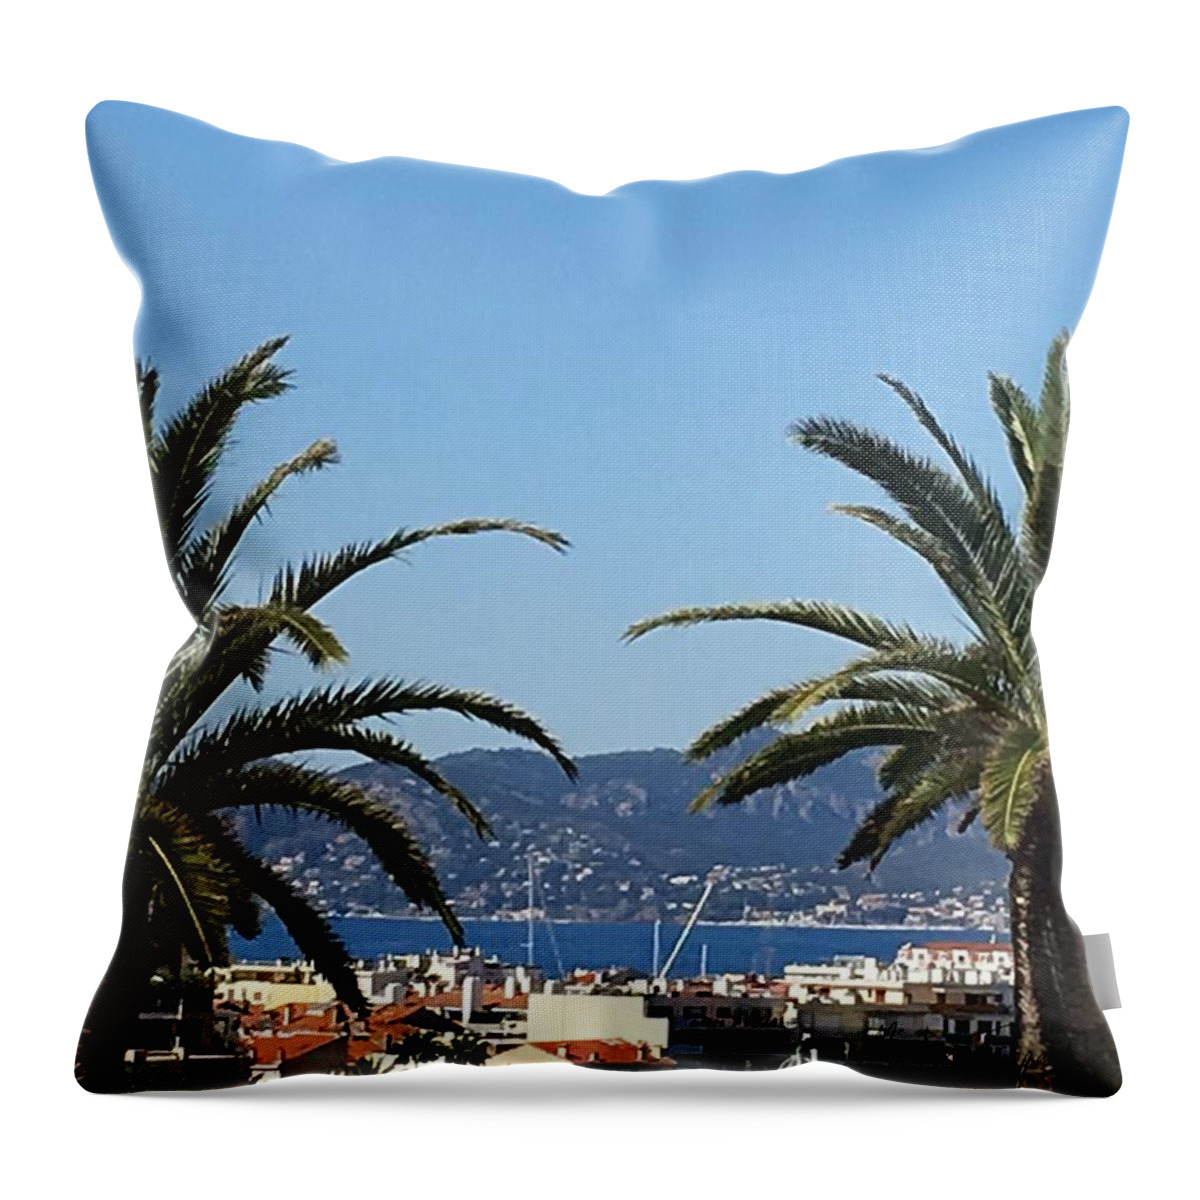 Cannes Throw Pillow featuring the photograph Cannes du Montfleury by Medge Jaspan